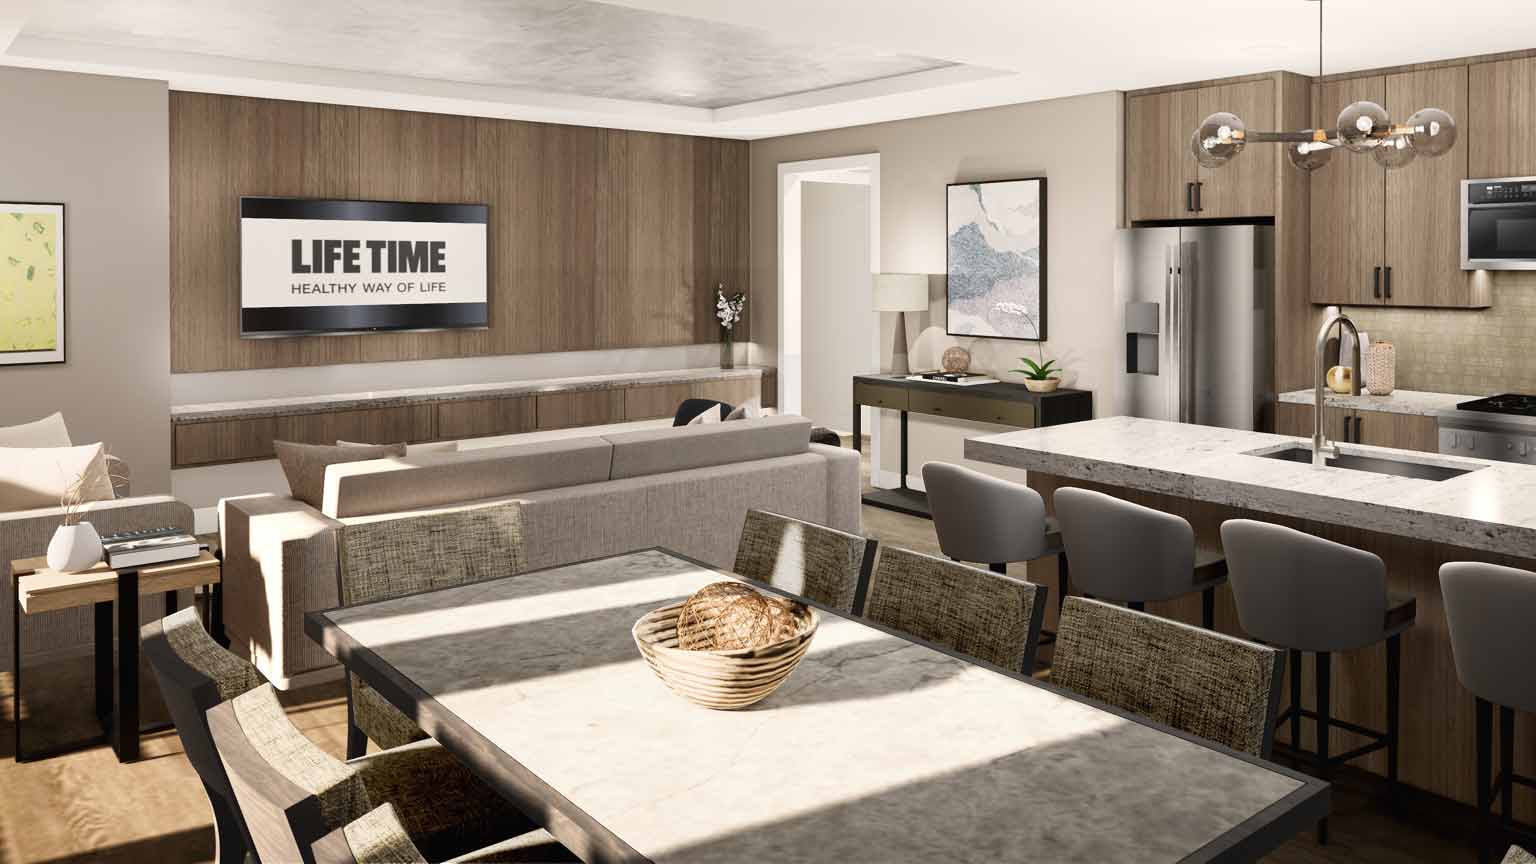 A photographic illustration of the kitchen and living area of the Life Time Living residential space